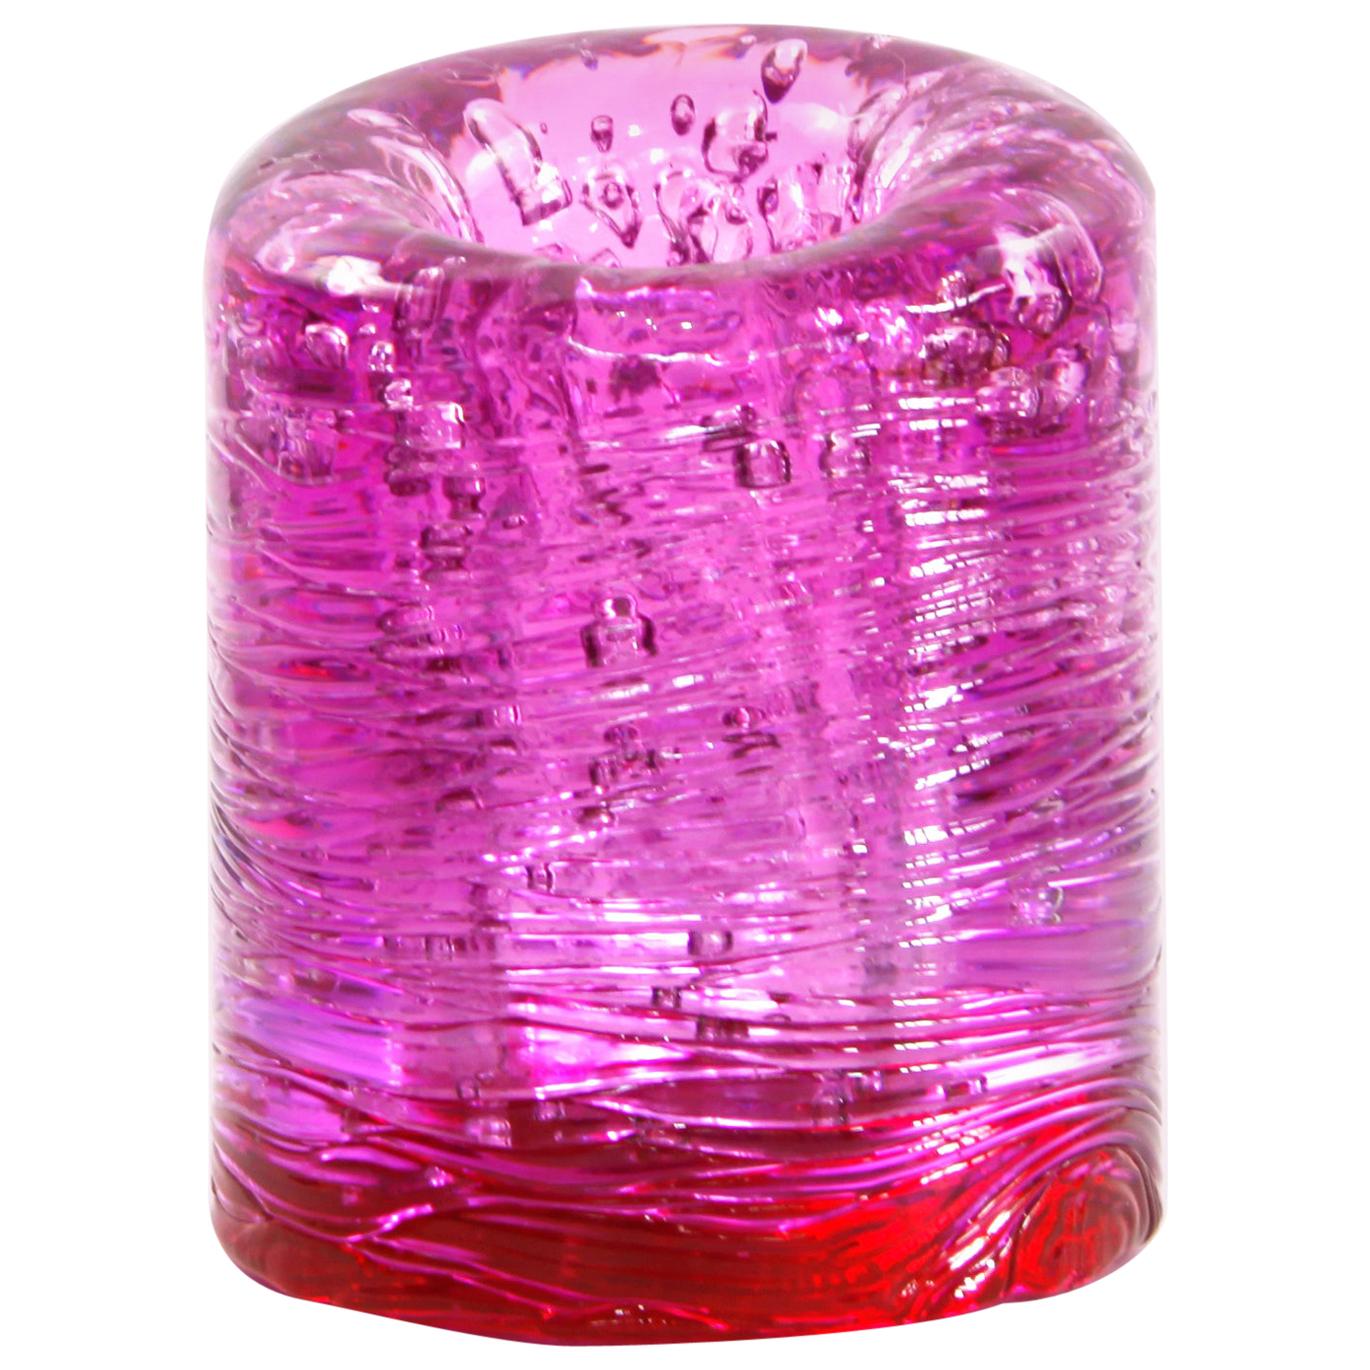 Jungle Contemporary Vase, Small Bicolor Pink and Red by Jacopo Foggini For Sale